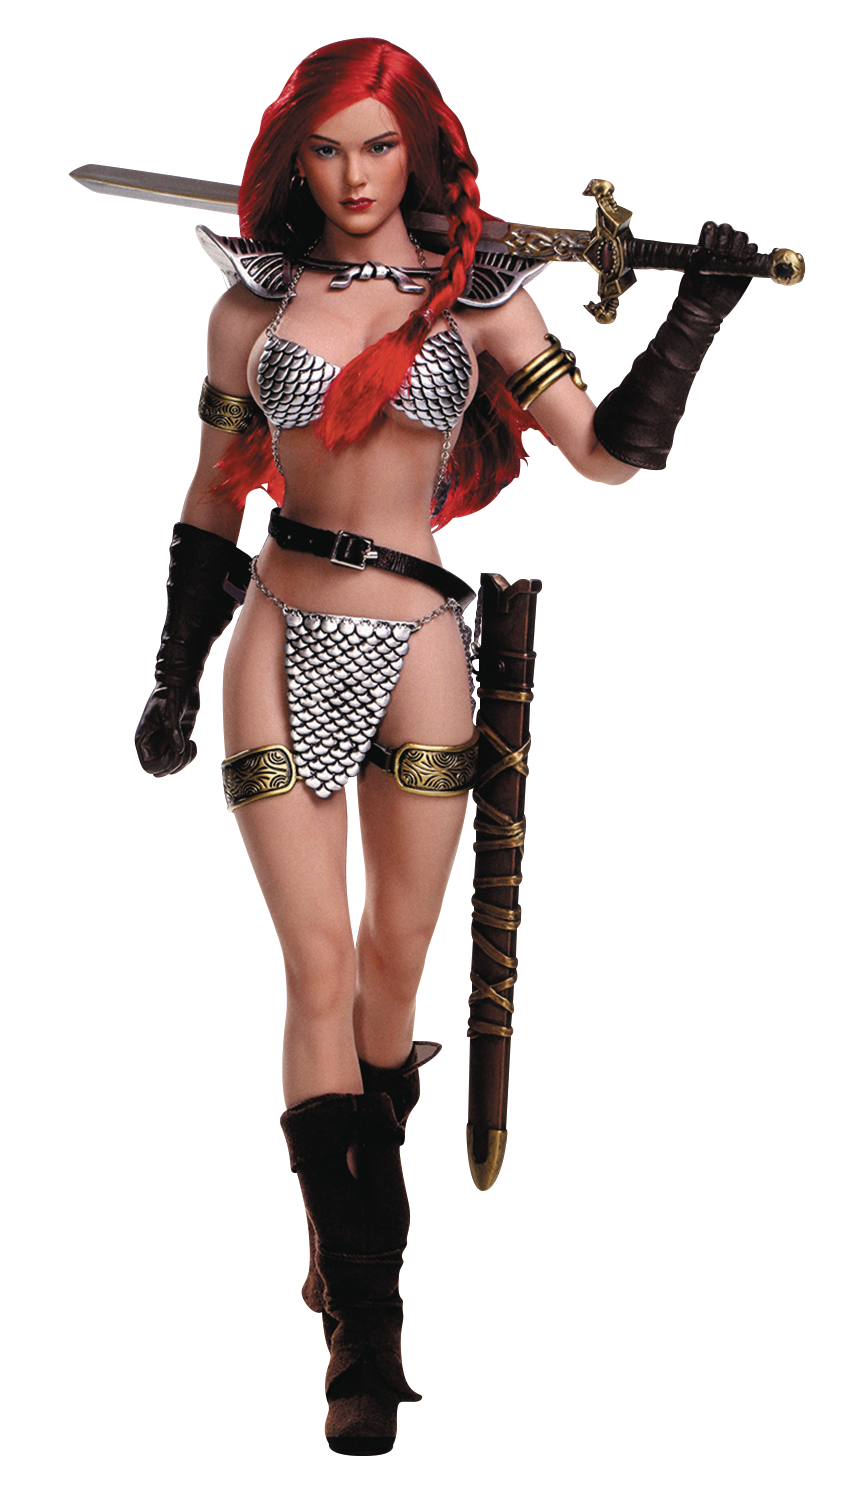 JAN168388 - RED SONJA 1/6 SCALE ACTION FIGURE - Previews World